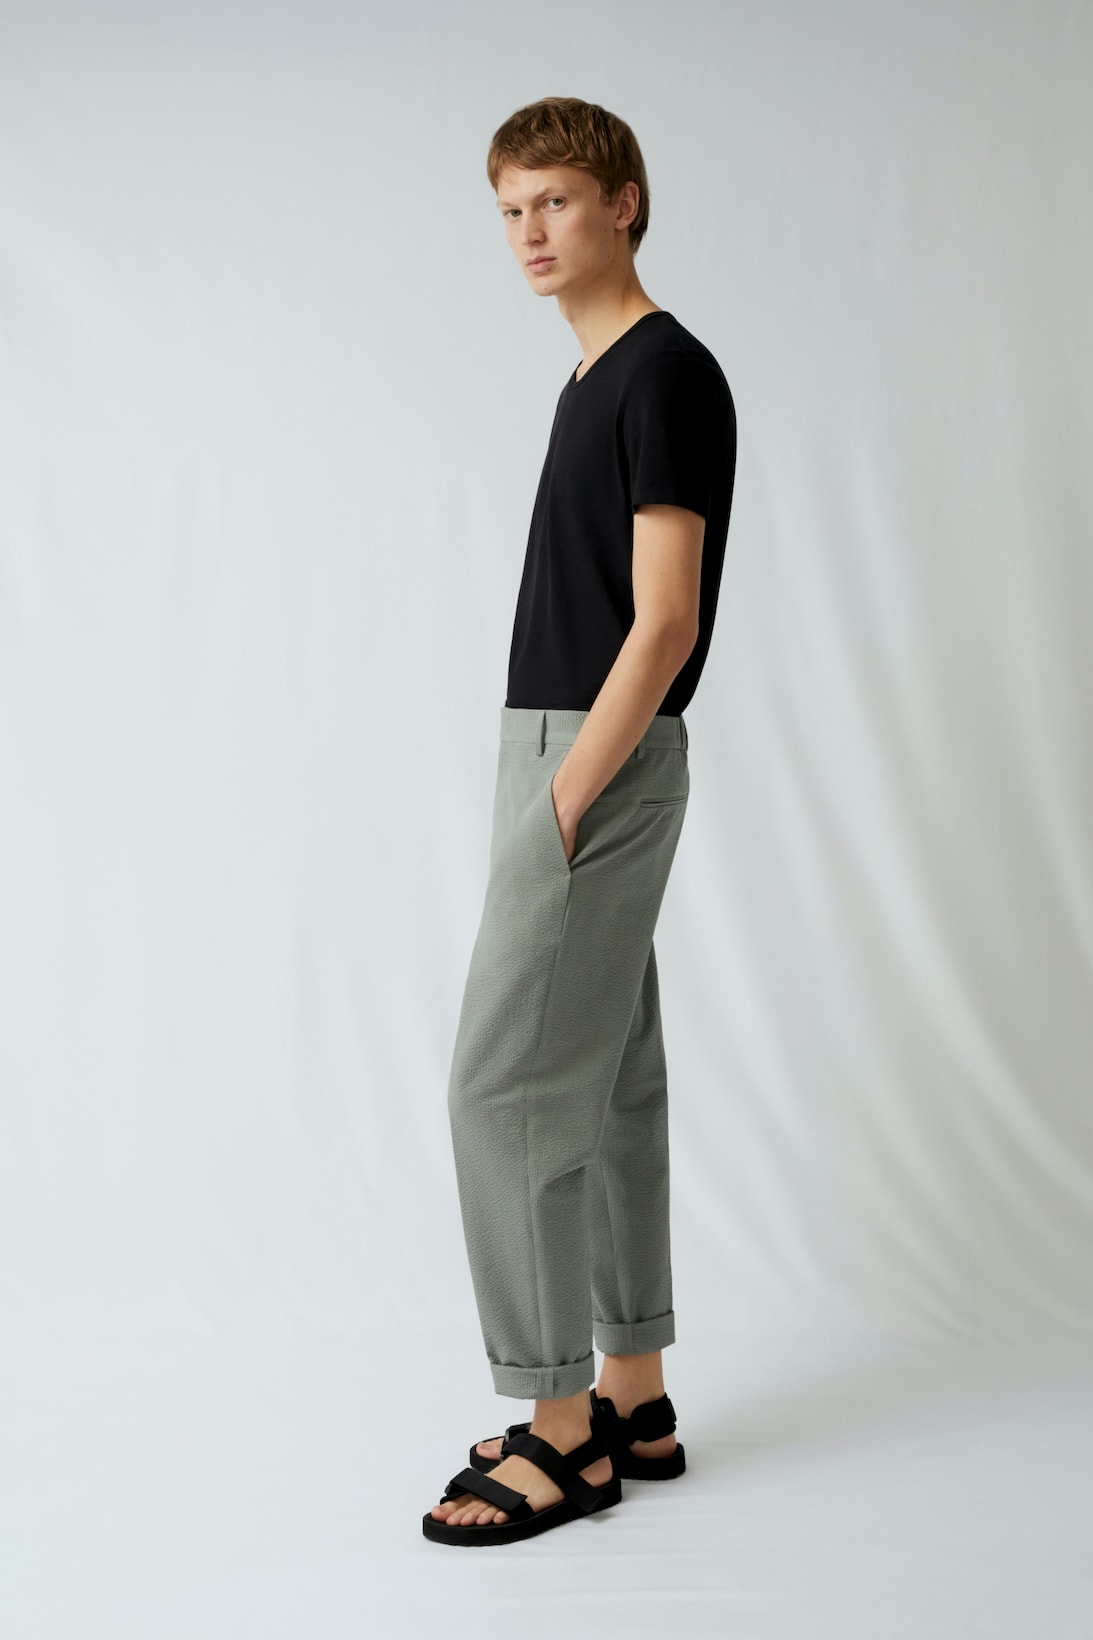 cos spring menswear summer collection lookbook black tee t shirt gray pants sandals